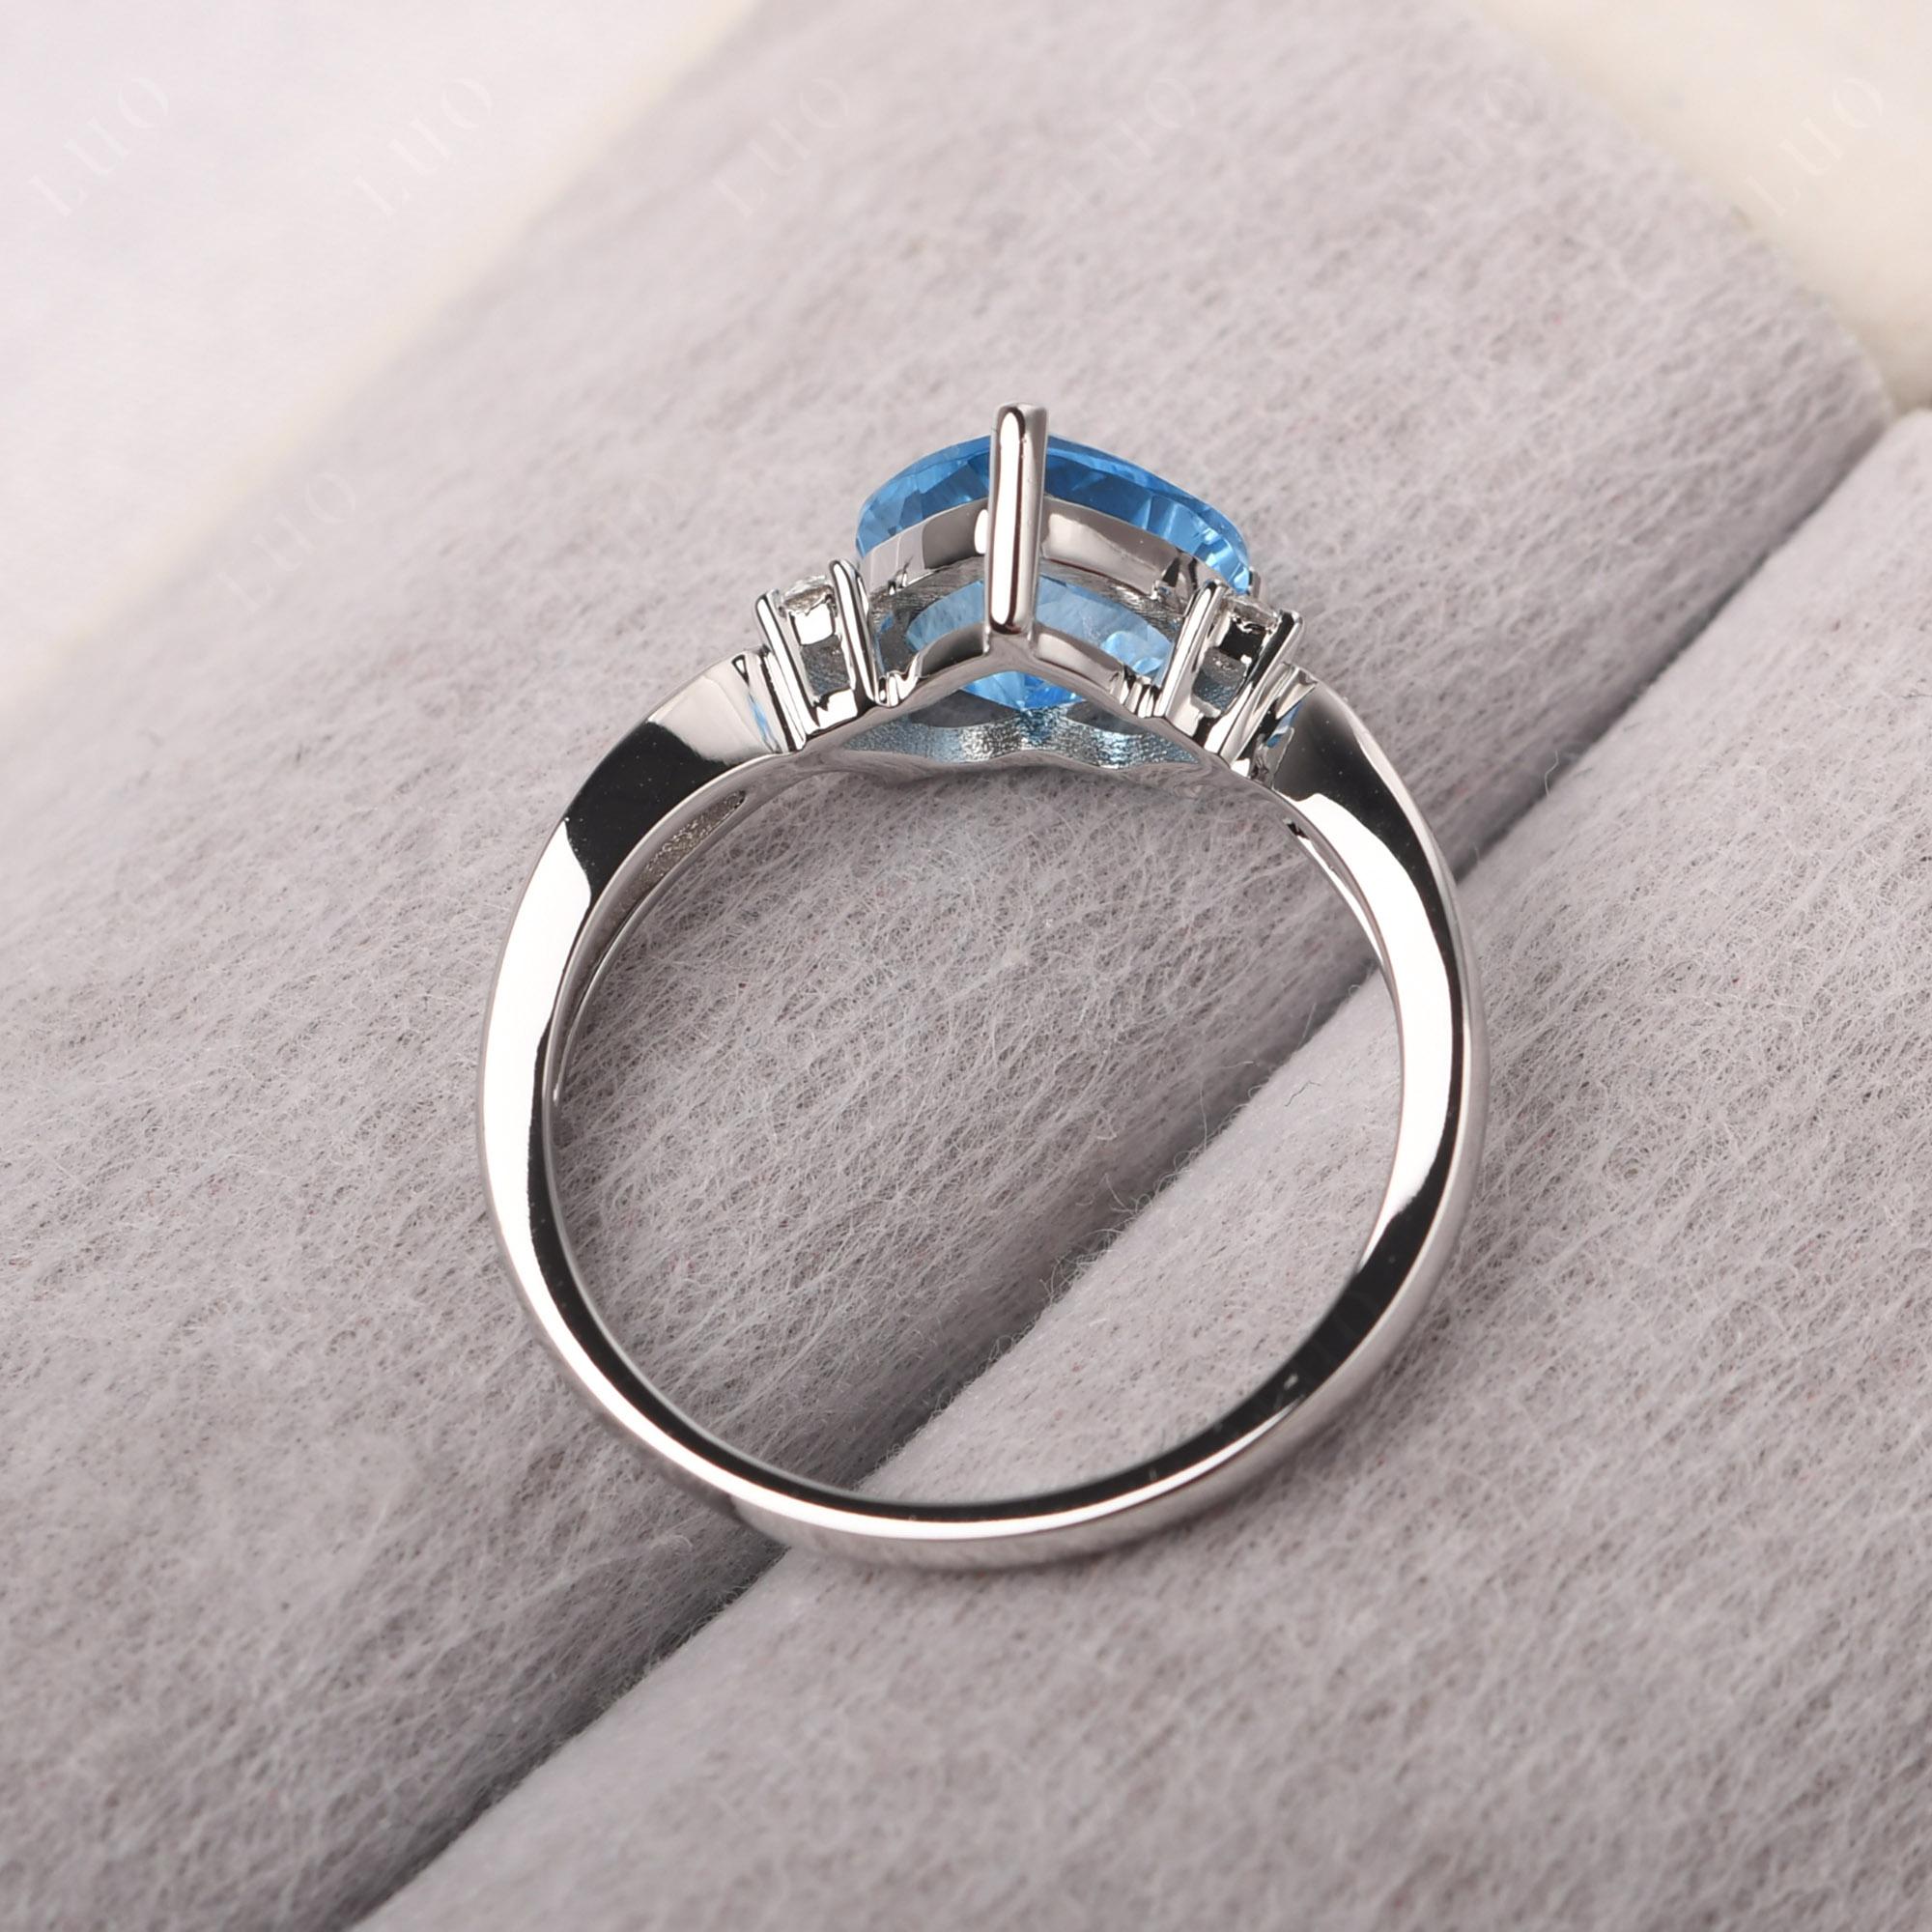 Heart Cut Swiss Blue Topaz Engagement Ring - LUO Jewelry